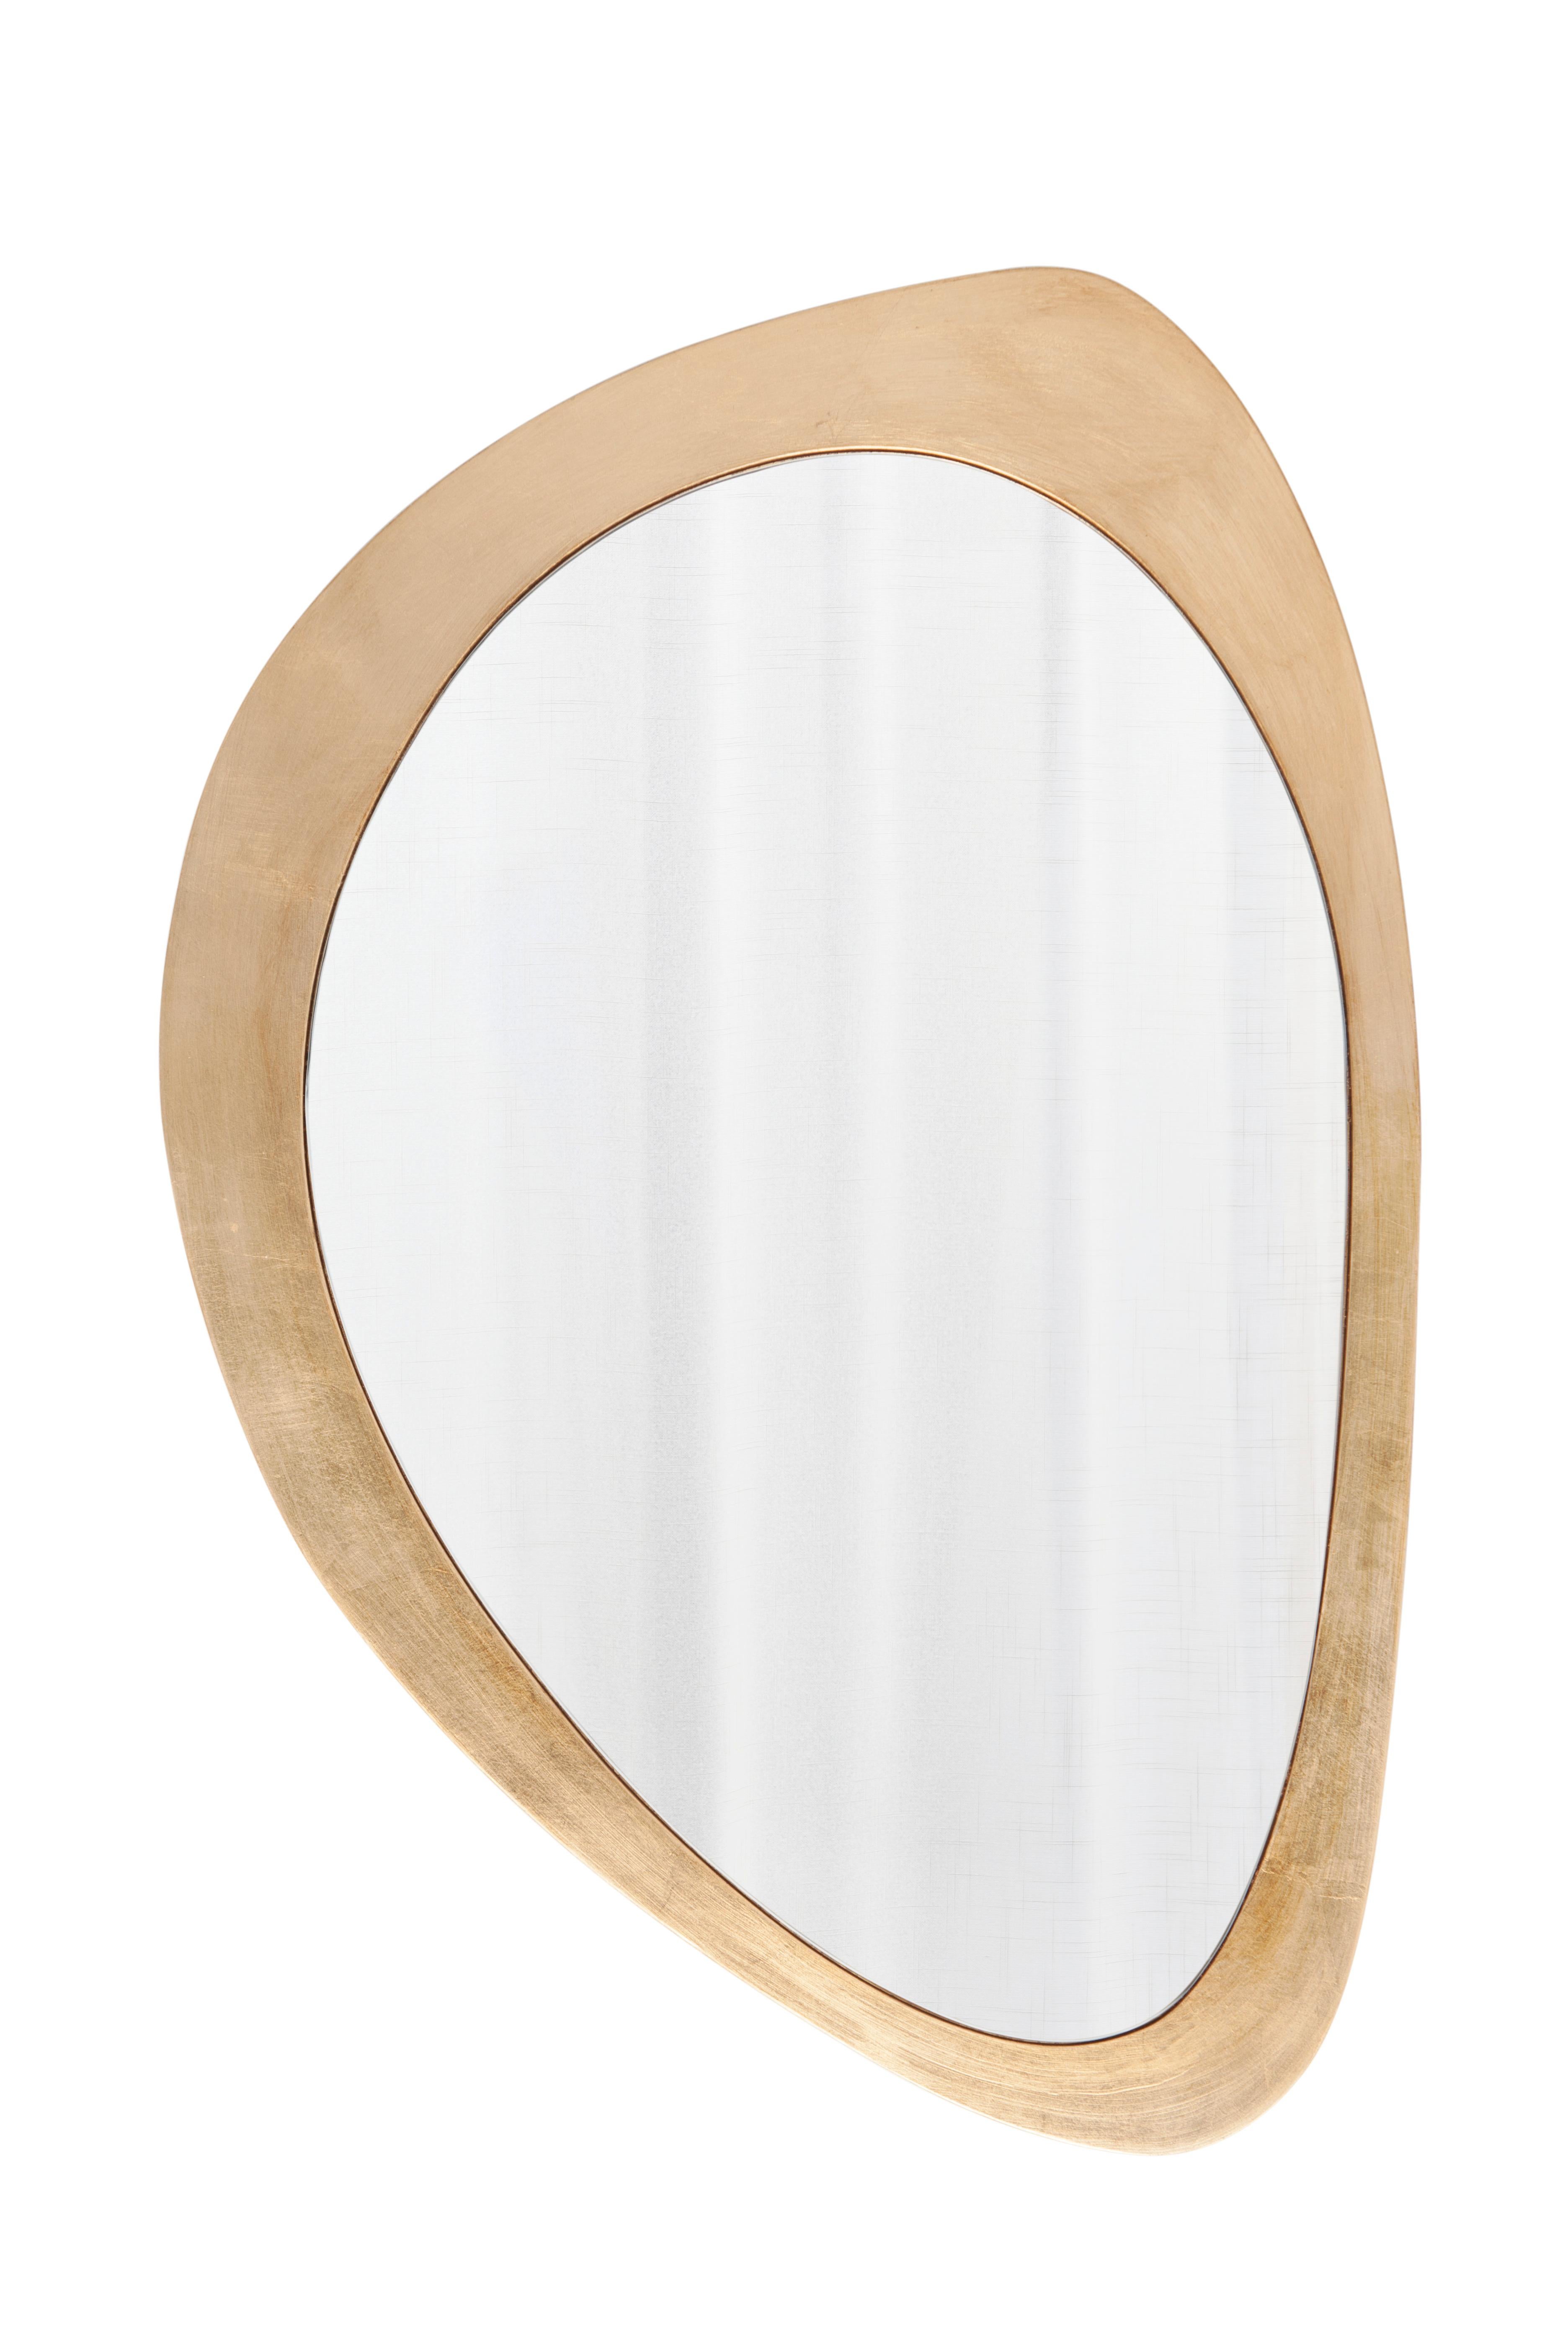 Hand-Crafted Modern Roanne Set/3 Wall Mirror Aged Gold Leaf Handmade Portugal Greenapple For Sale